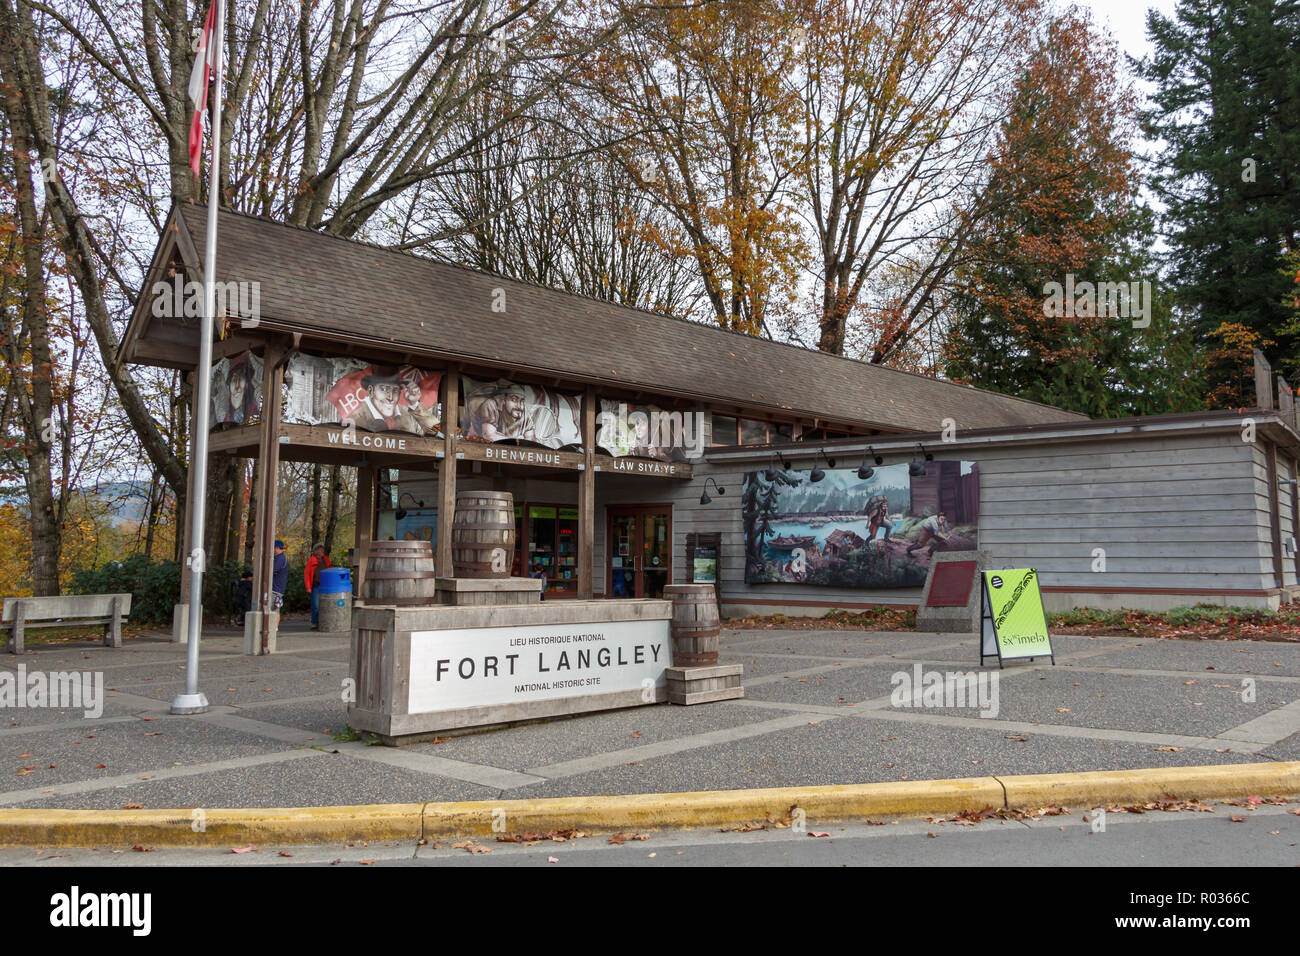 Fort Langley, Canada - Circa 2018 - Fort Langley Historic Site Stock Photo